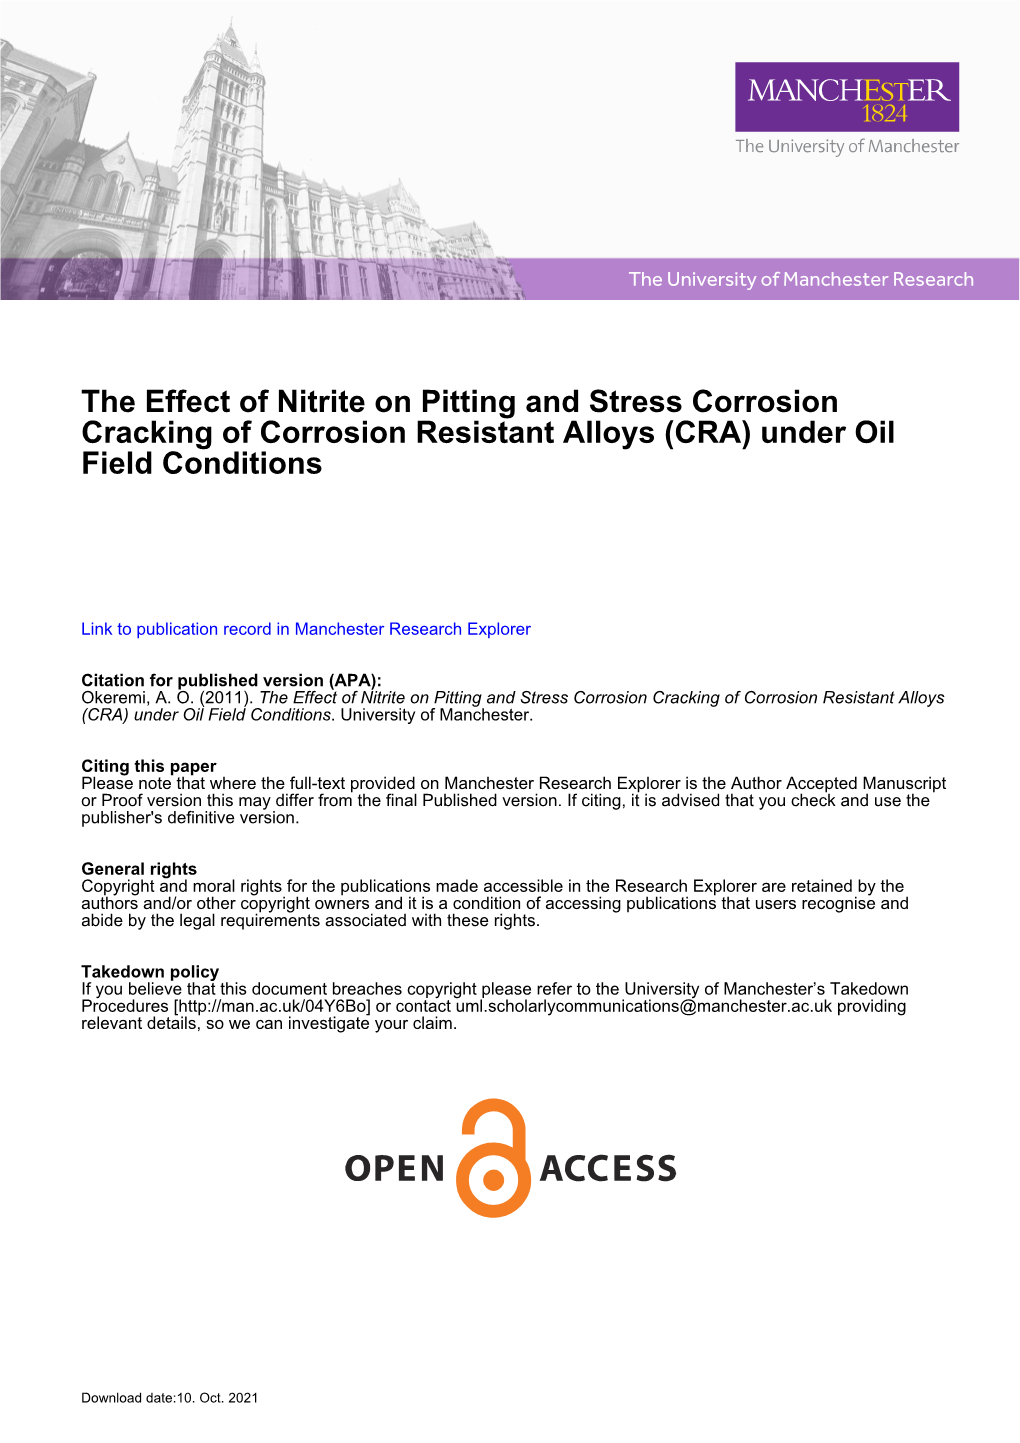 The Effect of Nitrite on Pitting and Stress Corrosion Cracking of Corrosion Resistant Alloys (CRA) Under Oil Field Conditions